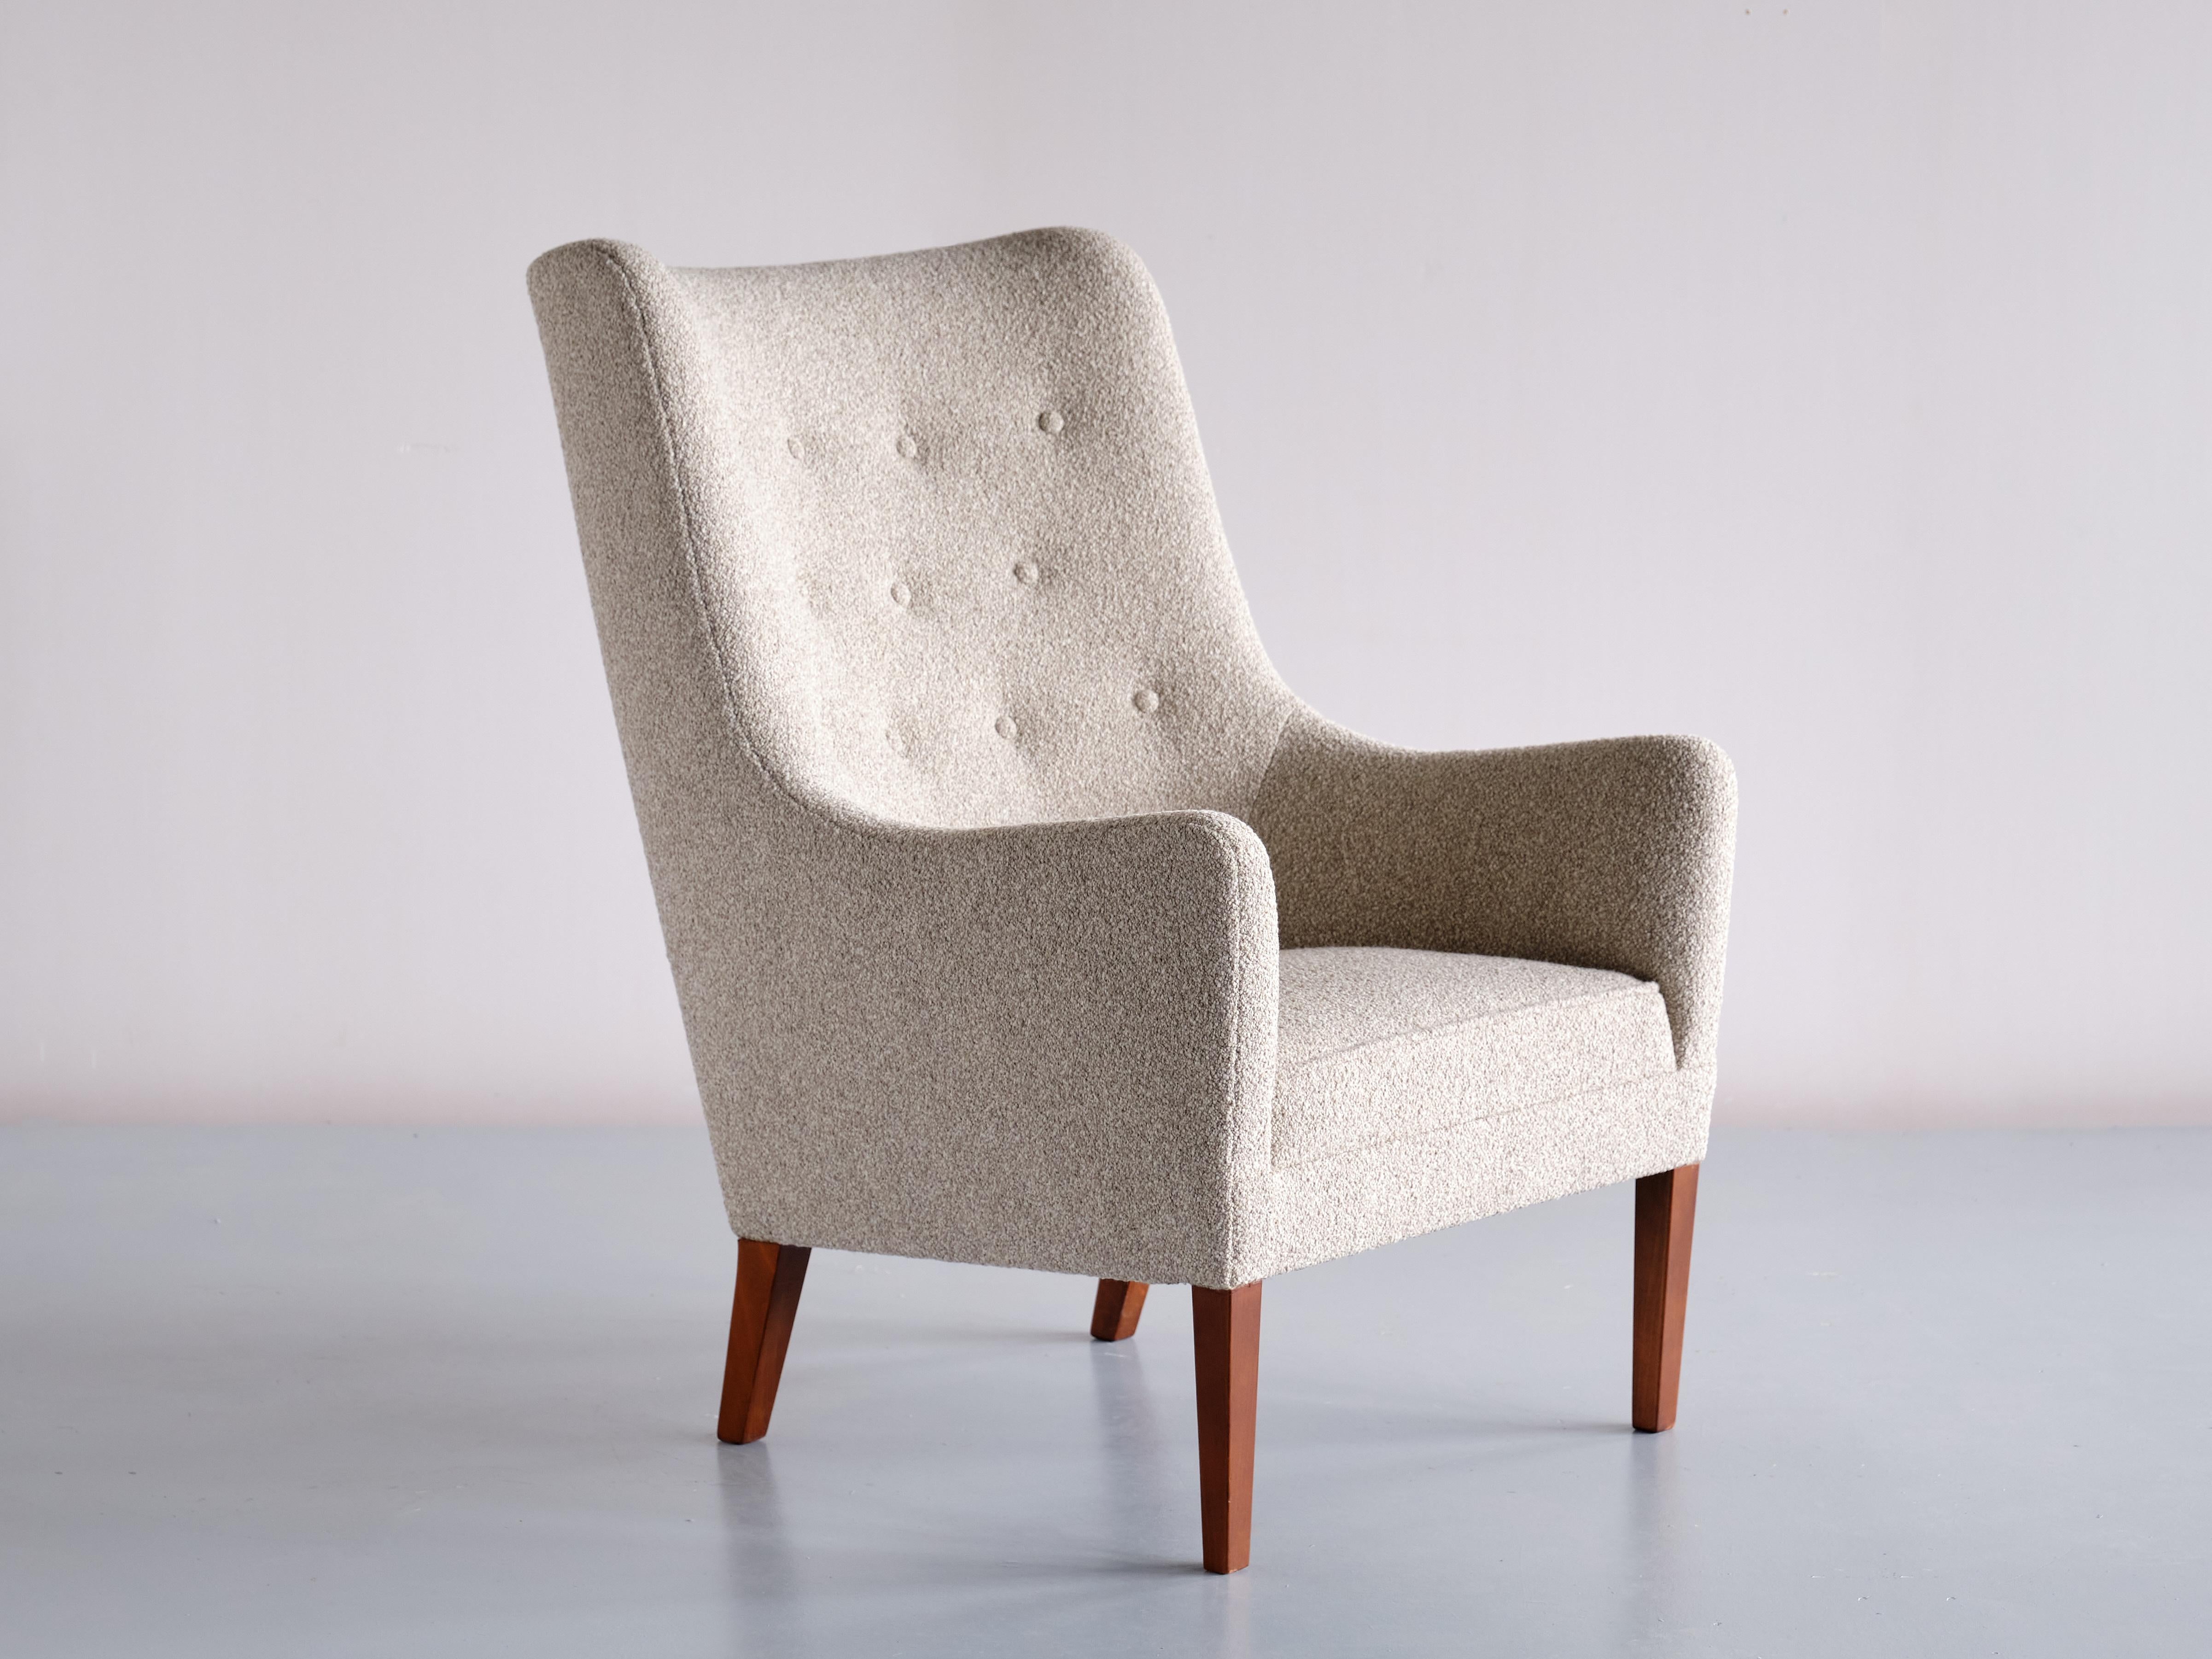 Pair of Jacob Kjær High Back Armchairs in Bouclé and Mahogany, Denmark, 1940s For Sale 1